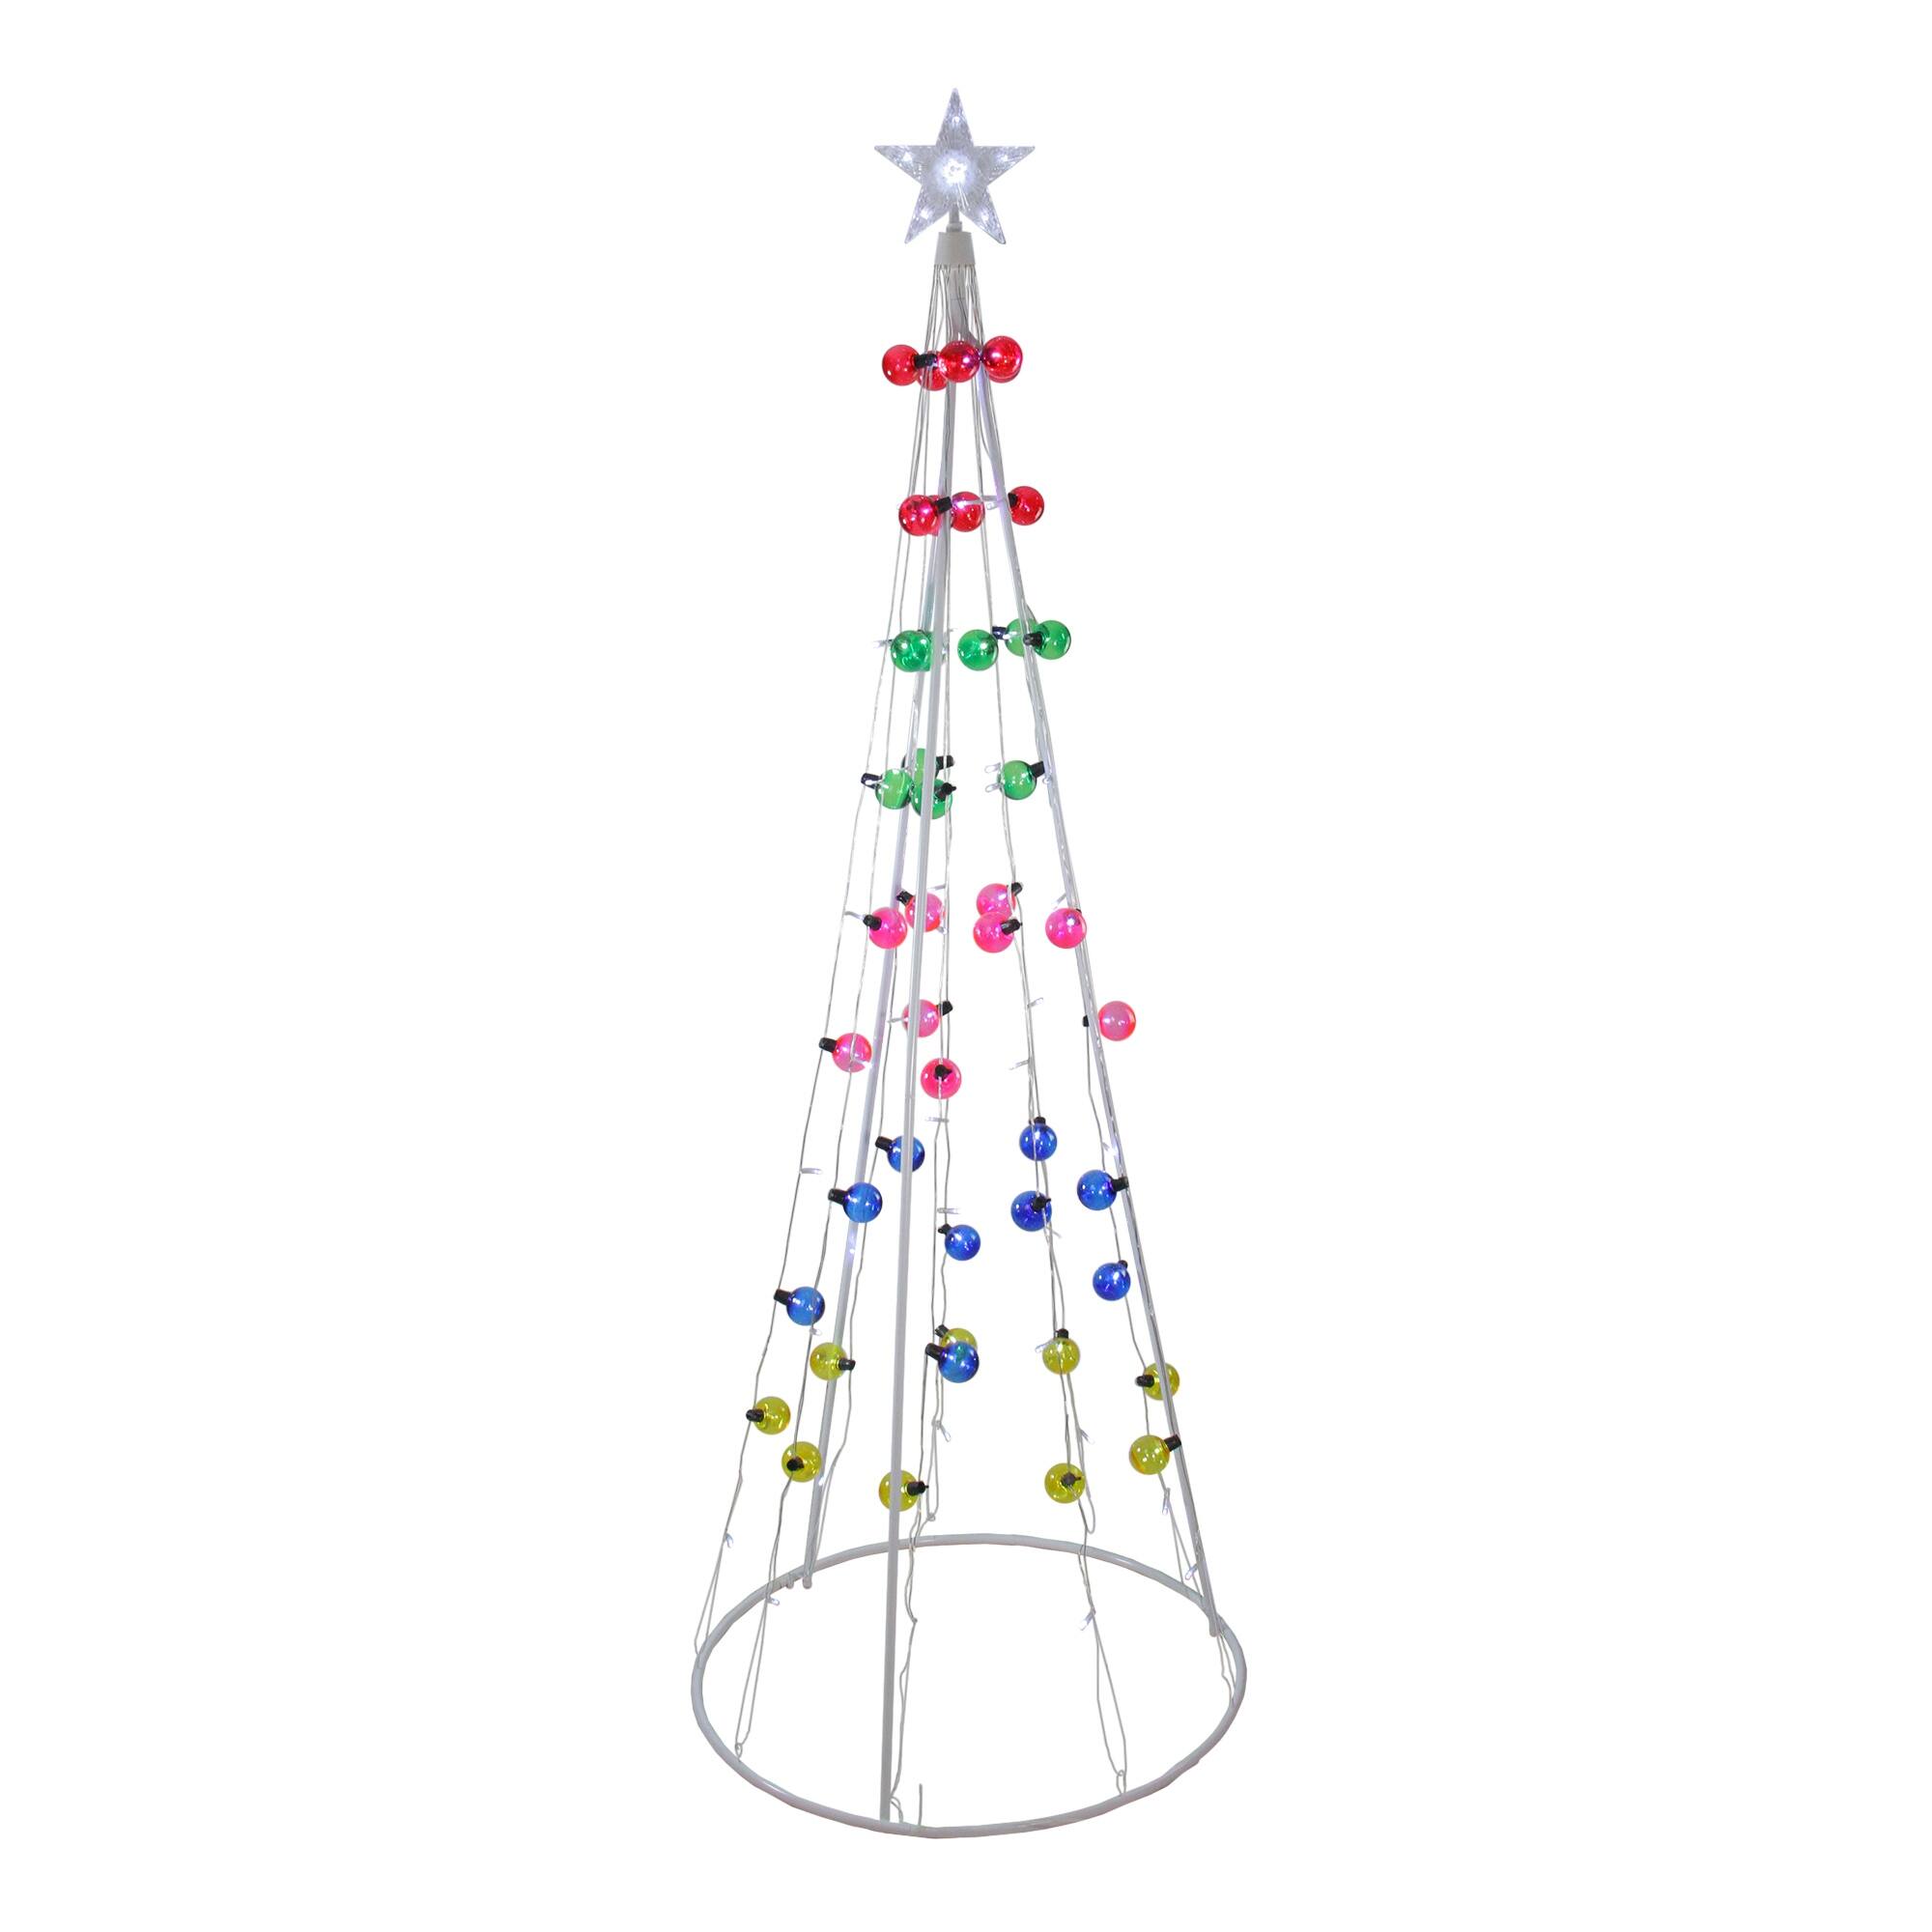 6' Multi-Colored Lighted Show Cone Christmas Tree Outdoor Decoration ...